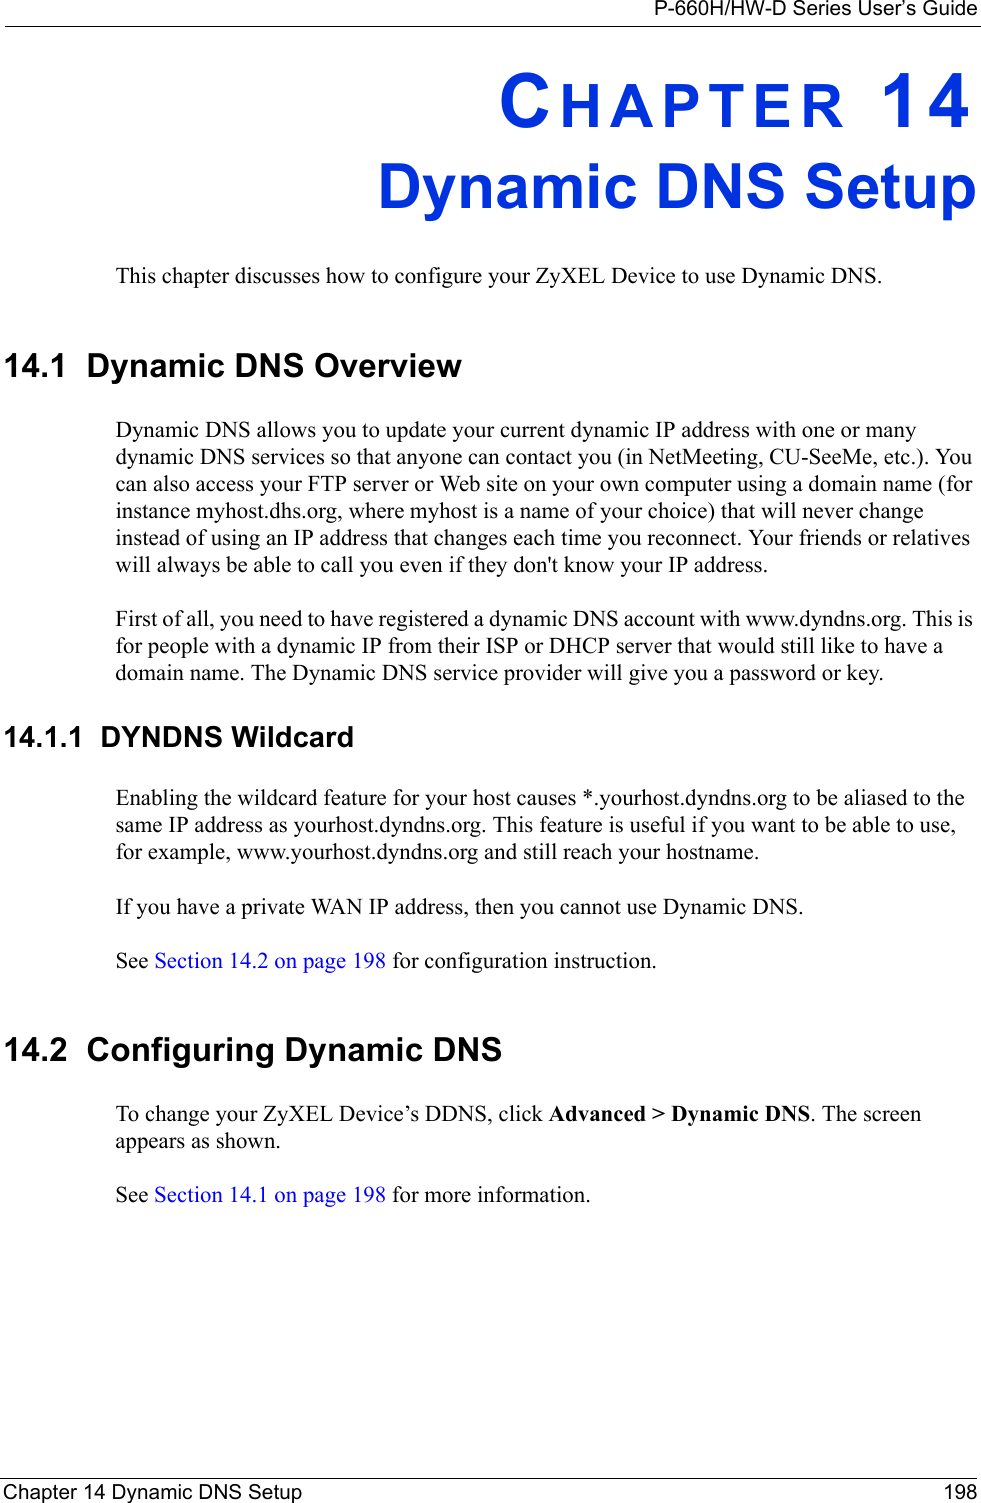 P-660H/HW-D Series User’s GuideChapter 14 Dynamic DNS Setup 198CHAPTER 14Dynamic DNS SetupThis chapter discusses how to configure your ZyXEL Device to use Dynamic DNS.14.1  Dynamic DNS Overview  Dynamic DNS allows you to update your current dynamic IP address with one or many dynamic DNS services so that anyone can contact you (in NetMeeting, CU-SeeMe, etc.). You can also access your FTP server or Web site on your own computer using a domain name (for instance myhost.dhs.org, where myhost is a name of your choice) that will never change instead of using an IP address that changes each time you reconnect. Your friends or relatives will always be able to call you even if they don&apos;t know your IP address.First of all, you need to have registered a dynamic DNS account with www.dyndns.org. This is for people with a dynamic IP from their ISP or DHCP server that would still like to have a domain name. The Dynamic DNS service provider will give you a password or key. 14.1.1  DYNDNS WildcardEnabling the wildcard feature for your host causes *.yourhost.dyndns.org to be aliased to the same IP address as yourhost.dyndns.org. This feature is useful if you want to be able to use, for example, www.yourhost.dyndns.org and still reach your hostname.If you have a private WAN IP address, then you cannot use Dynamic DNS.See Section 14.2 on page 198 for configuration instruction. 14.2  Configuring Dynamic DNS To change your ZyXEL Device’s DDNS, click Advanced &gt; Dynamic DNS. The screen appears as shown.See Section 14.1 on page 198 for more information. 